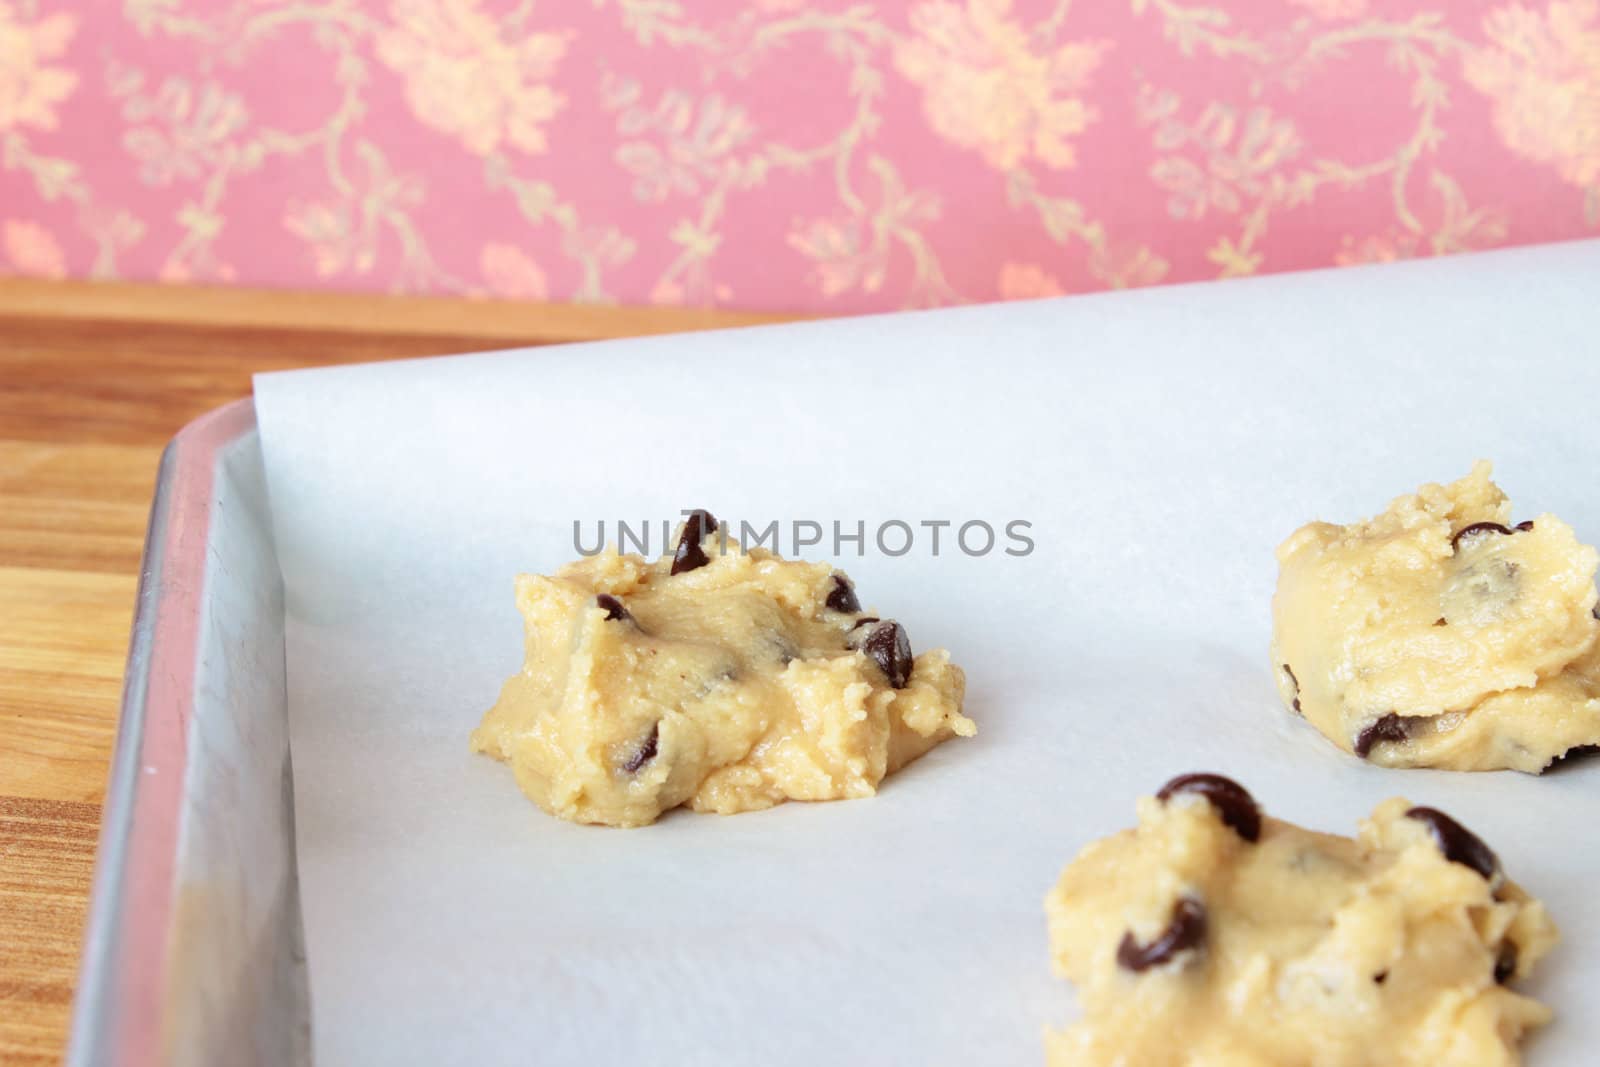 A close-up image of a cookie sheet lined with parchment paper, with chocolate chip cookie dough shaped into cookies, on a wooden counter with a dark pink vintage flowered wallpaper background.